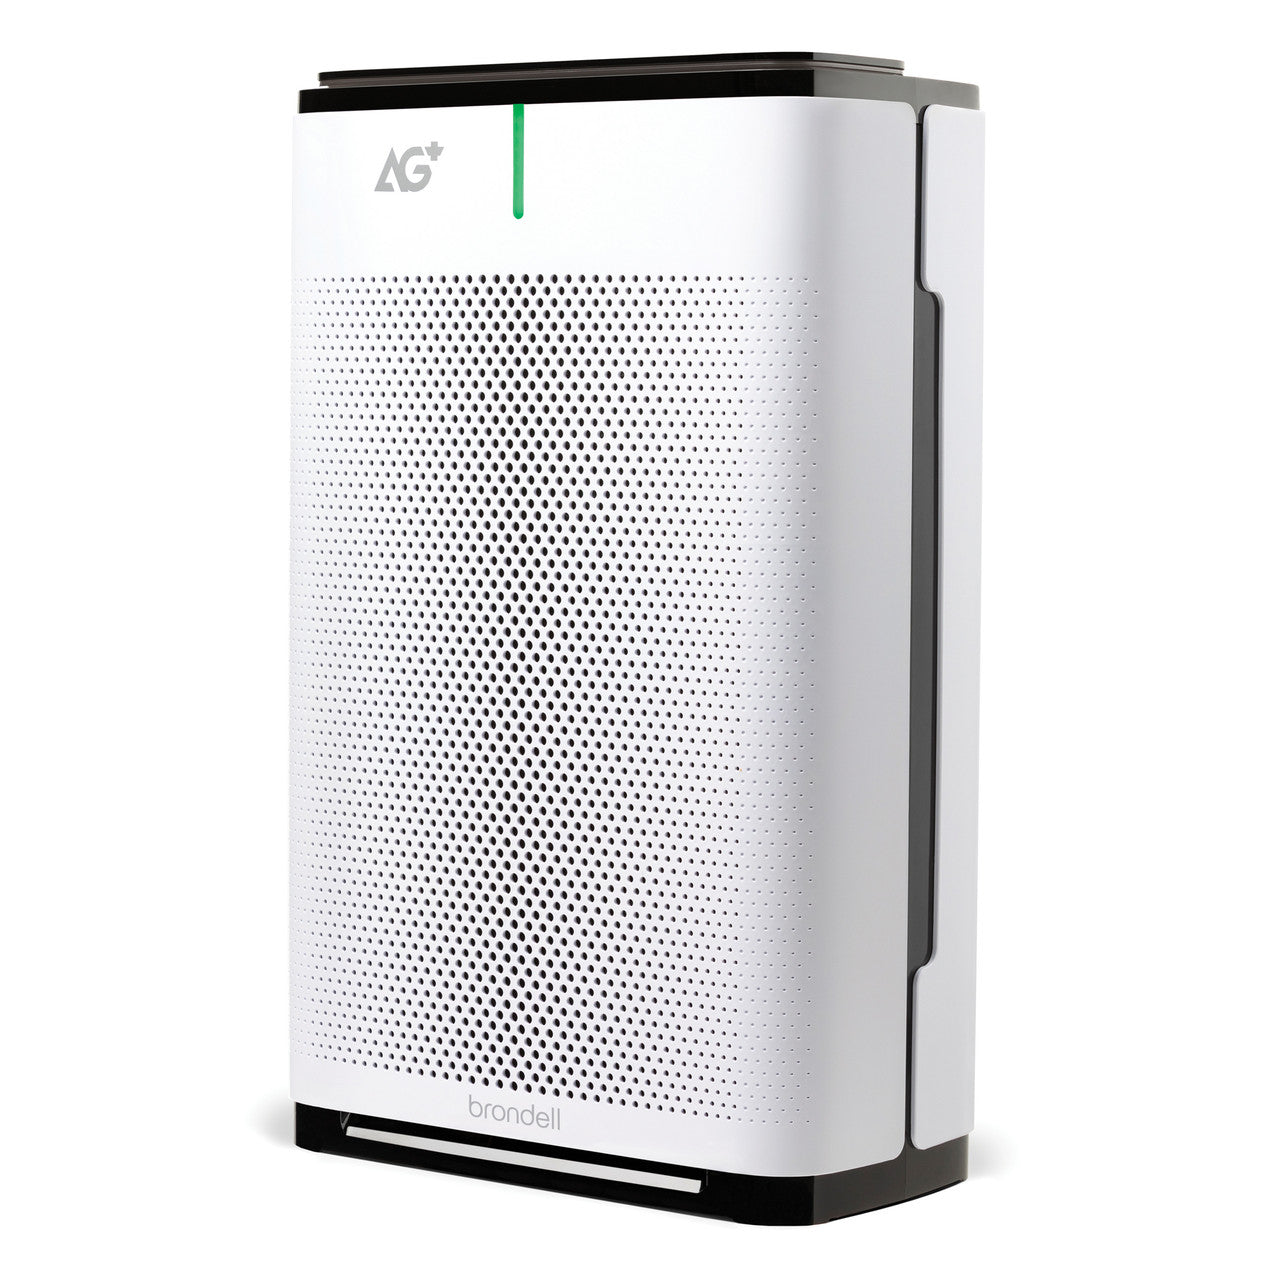 Brondell Pro Air Purifier and Capella (RC250) Bundle